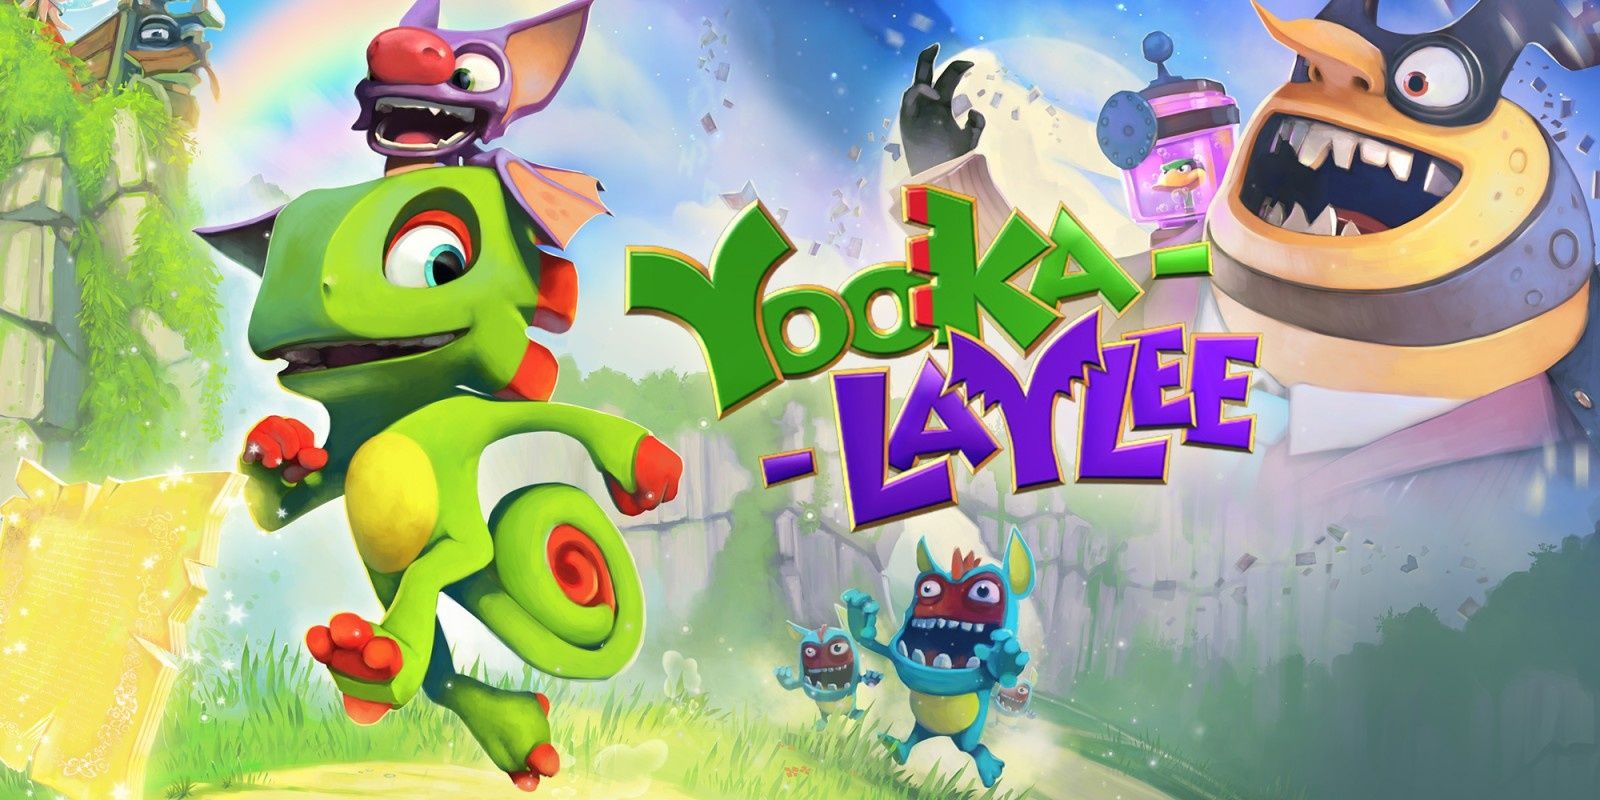 Banner for the video game Yooka-Laylee featuring the main characters